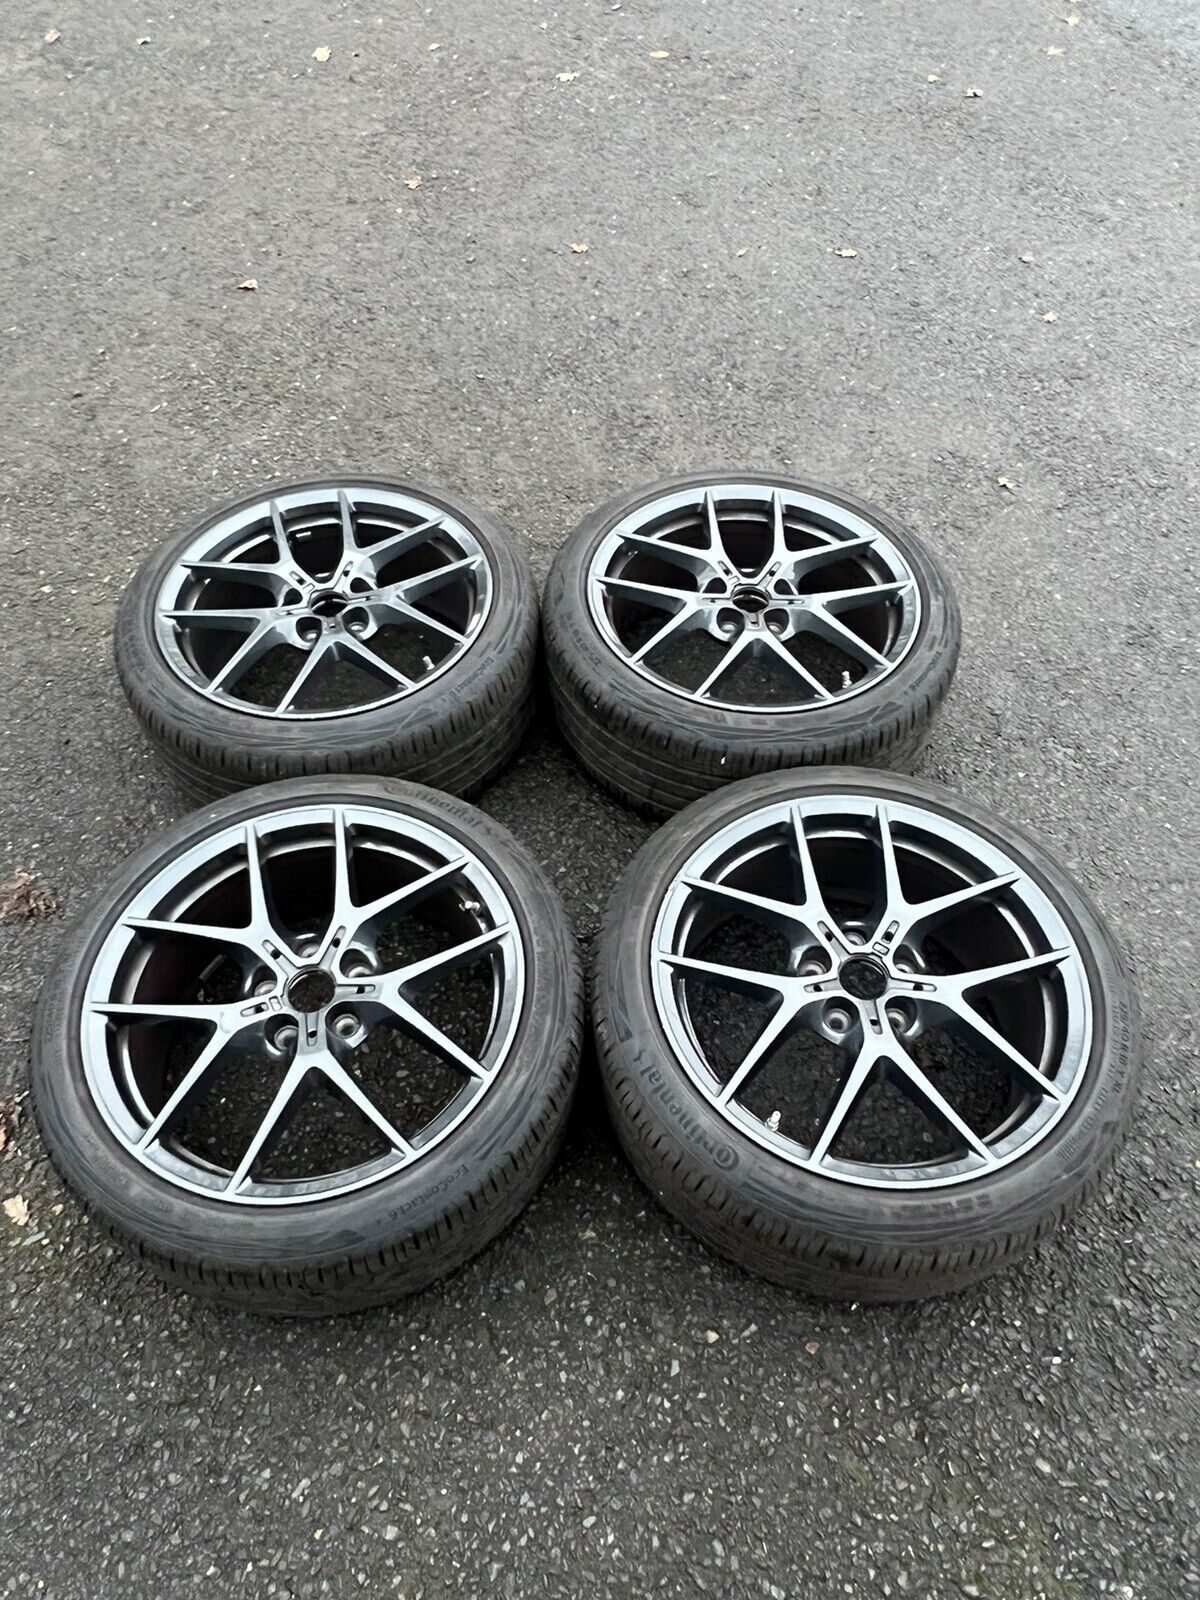 Genuine Bmw F40,F42,F44 18” Alloy Wheels & Tyres Style:554 Part No:8092353